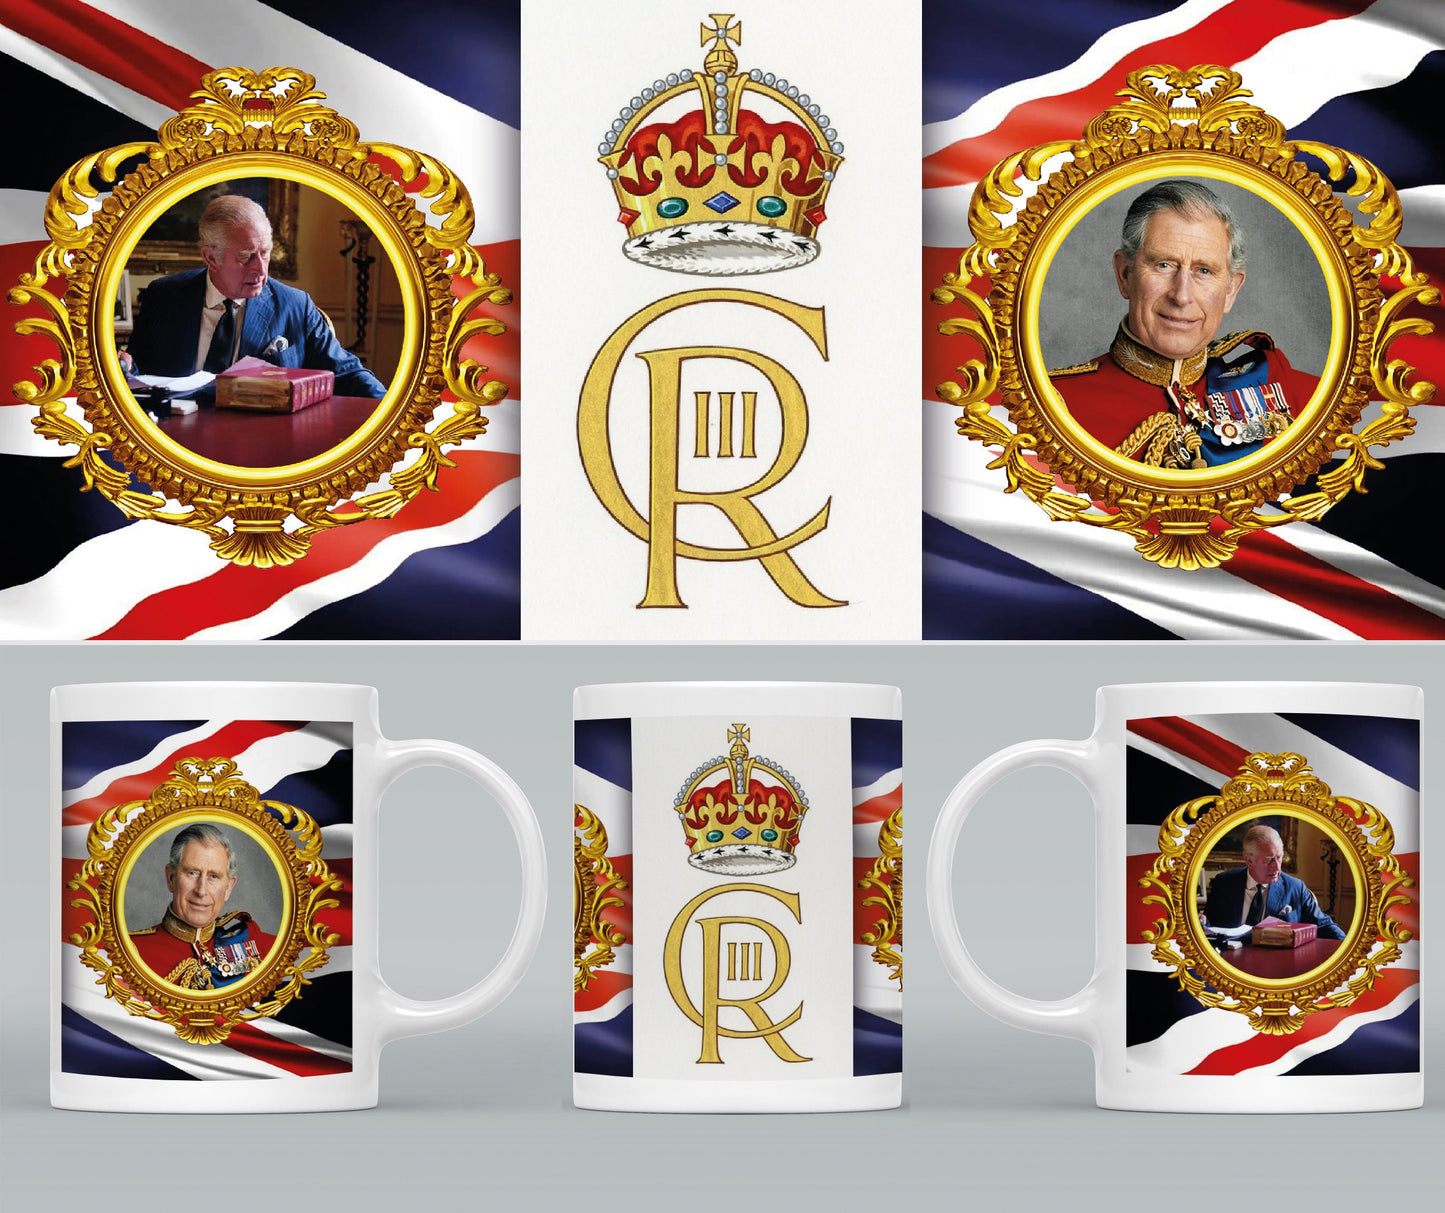 His Majesty King Charles III - Tribute Commemorative Mug D God Save The King UK Britain Queen Elizabeth